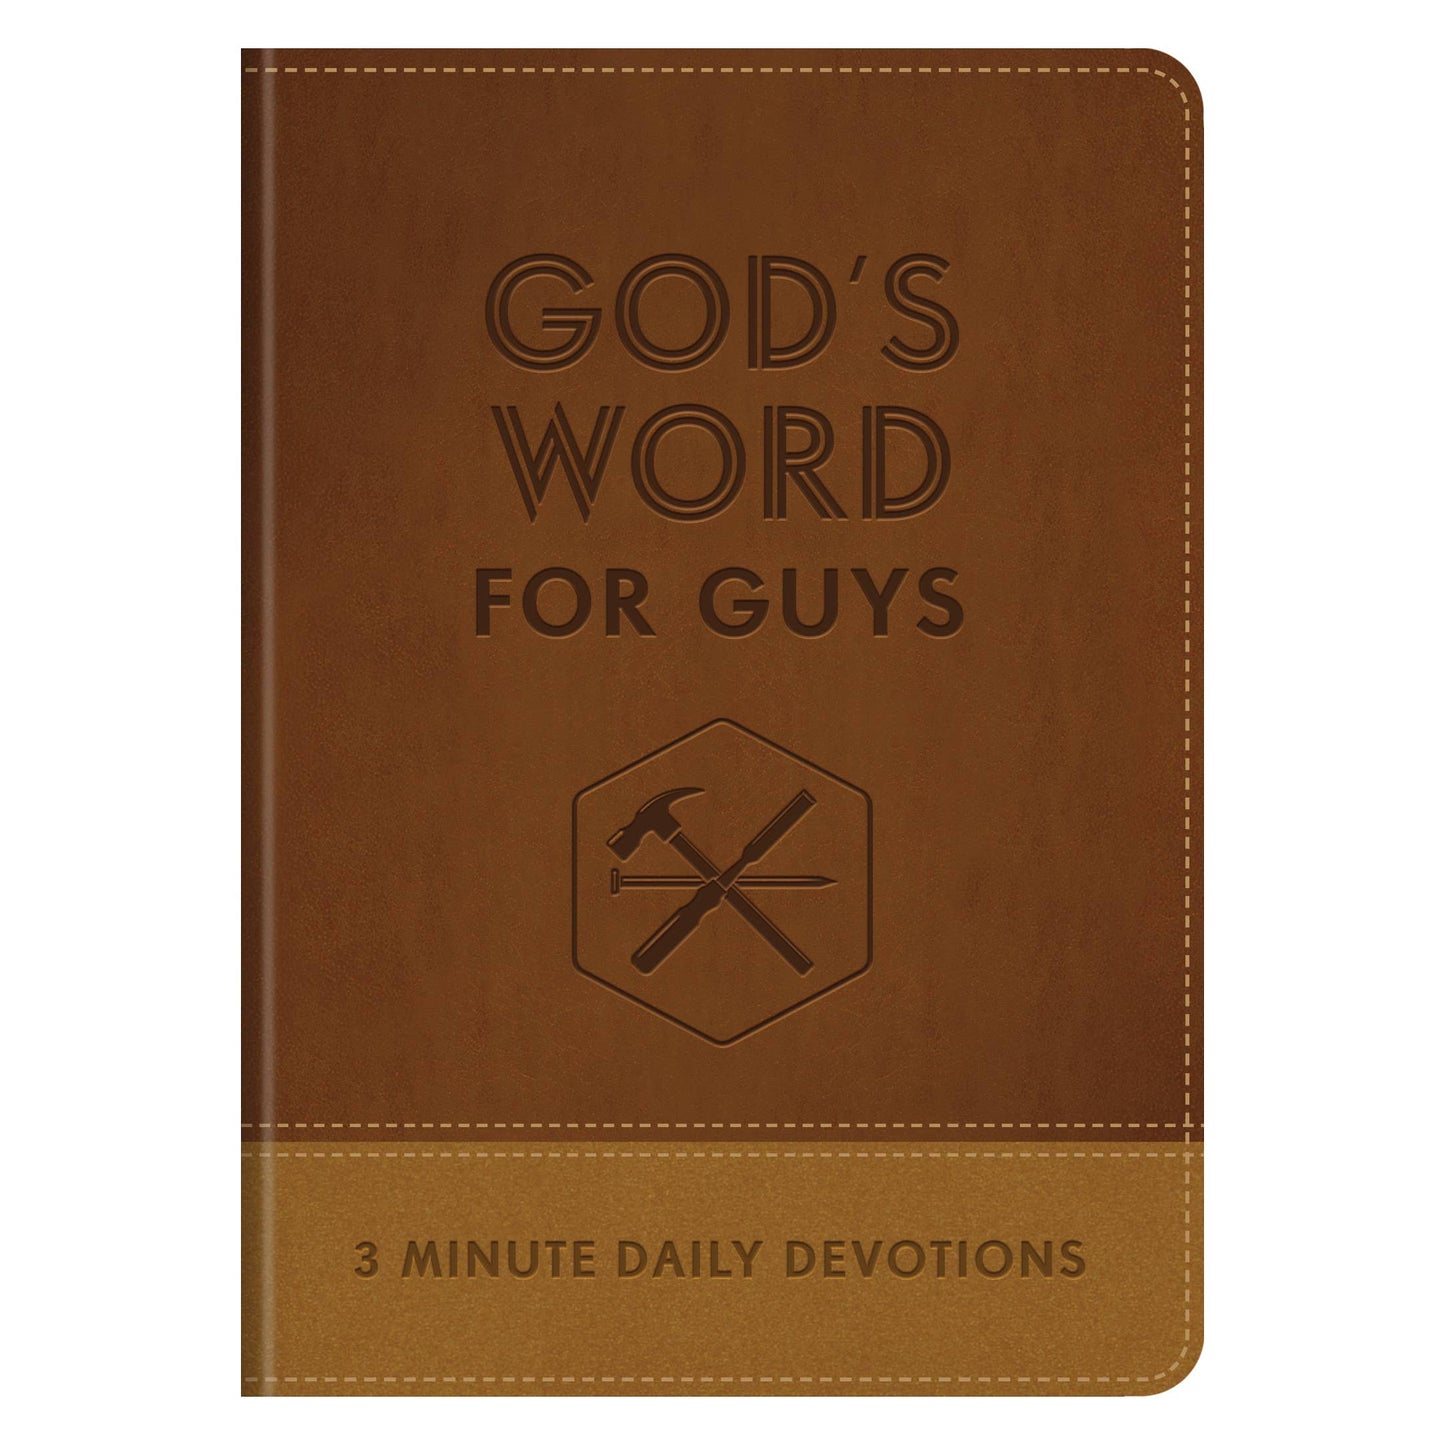 God's Word for Guys : 3-Minute Daily Devotions